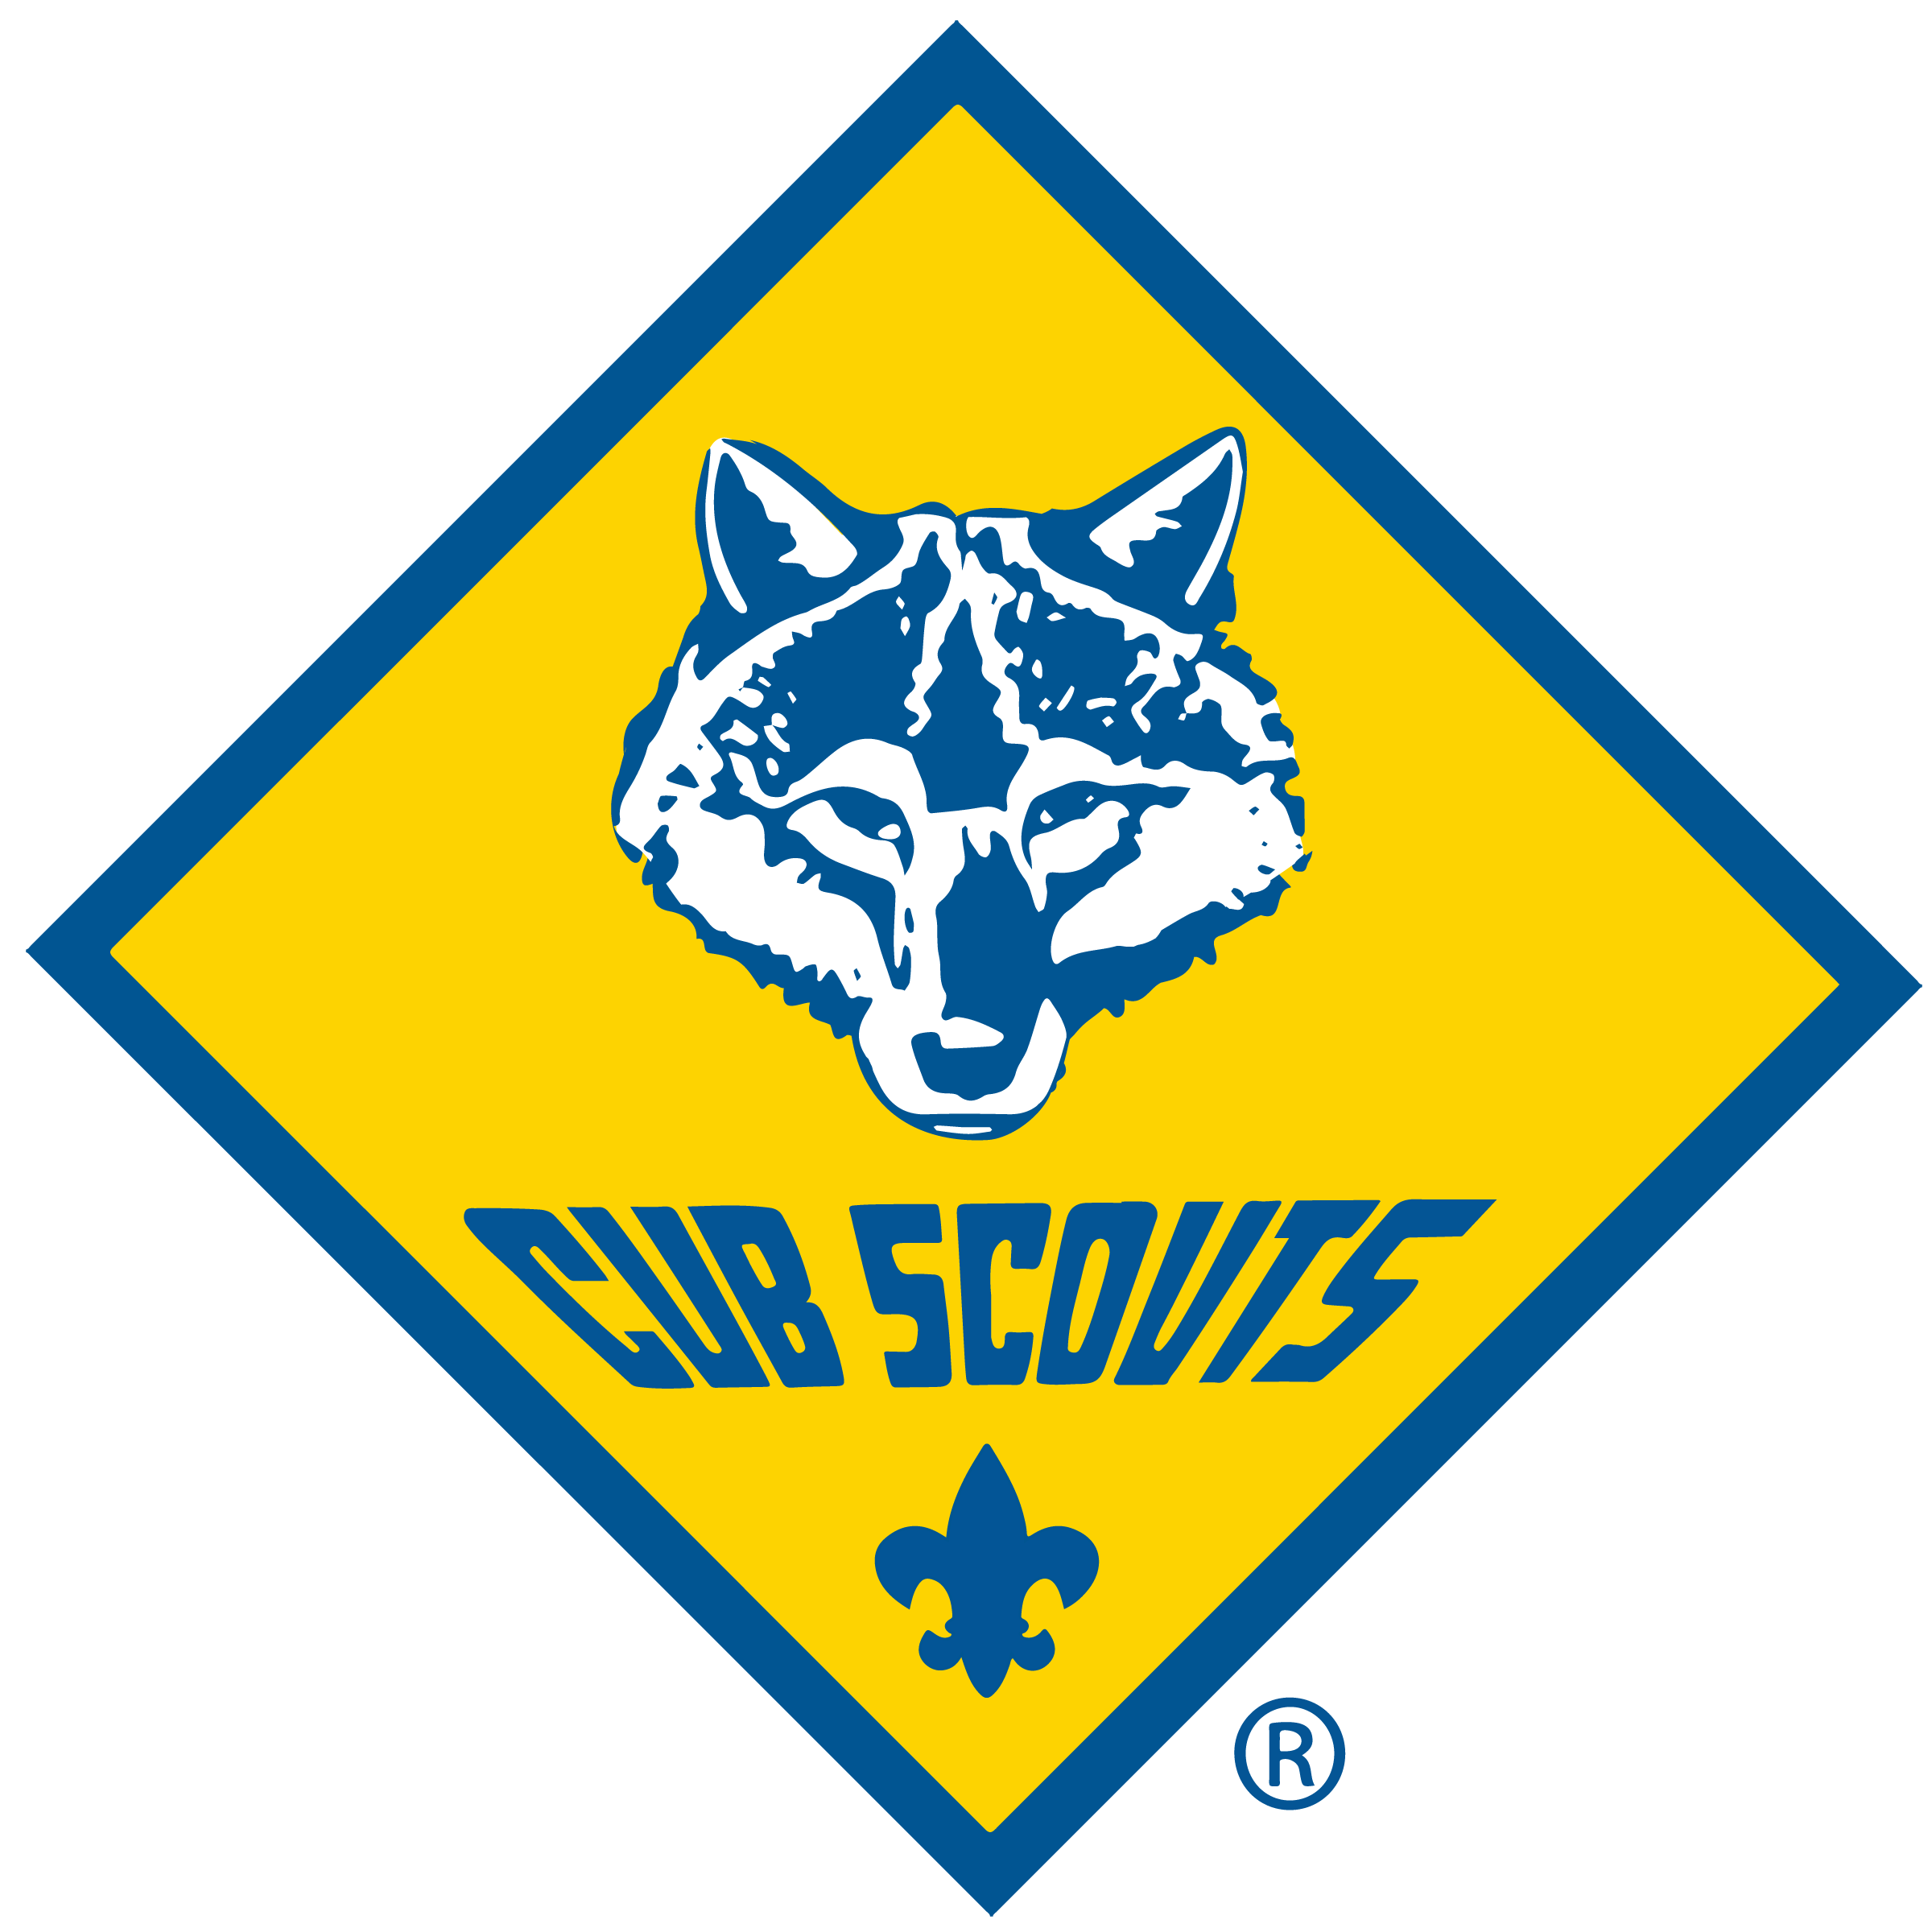 Scout Logo - I was frustrated with the available high resolution versions